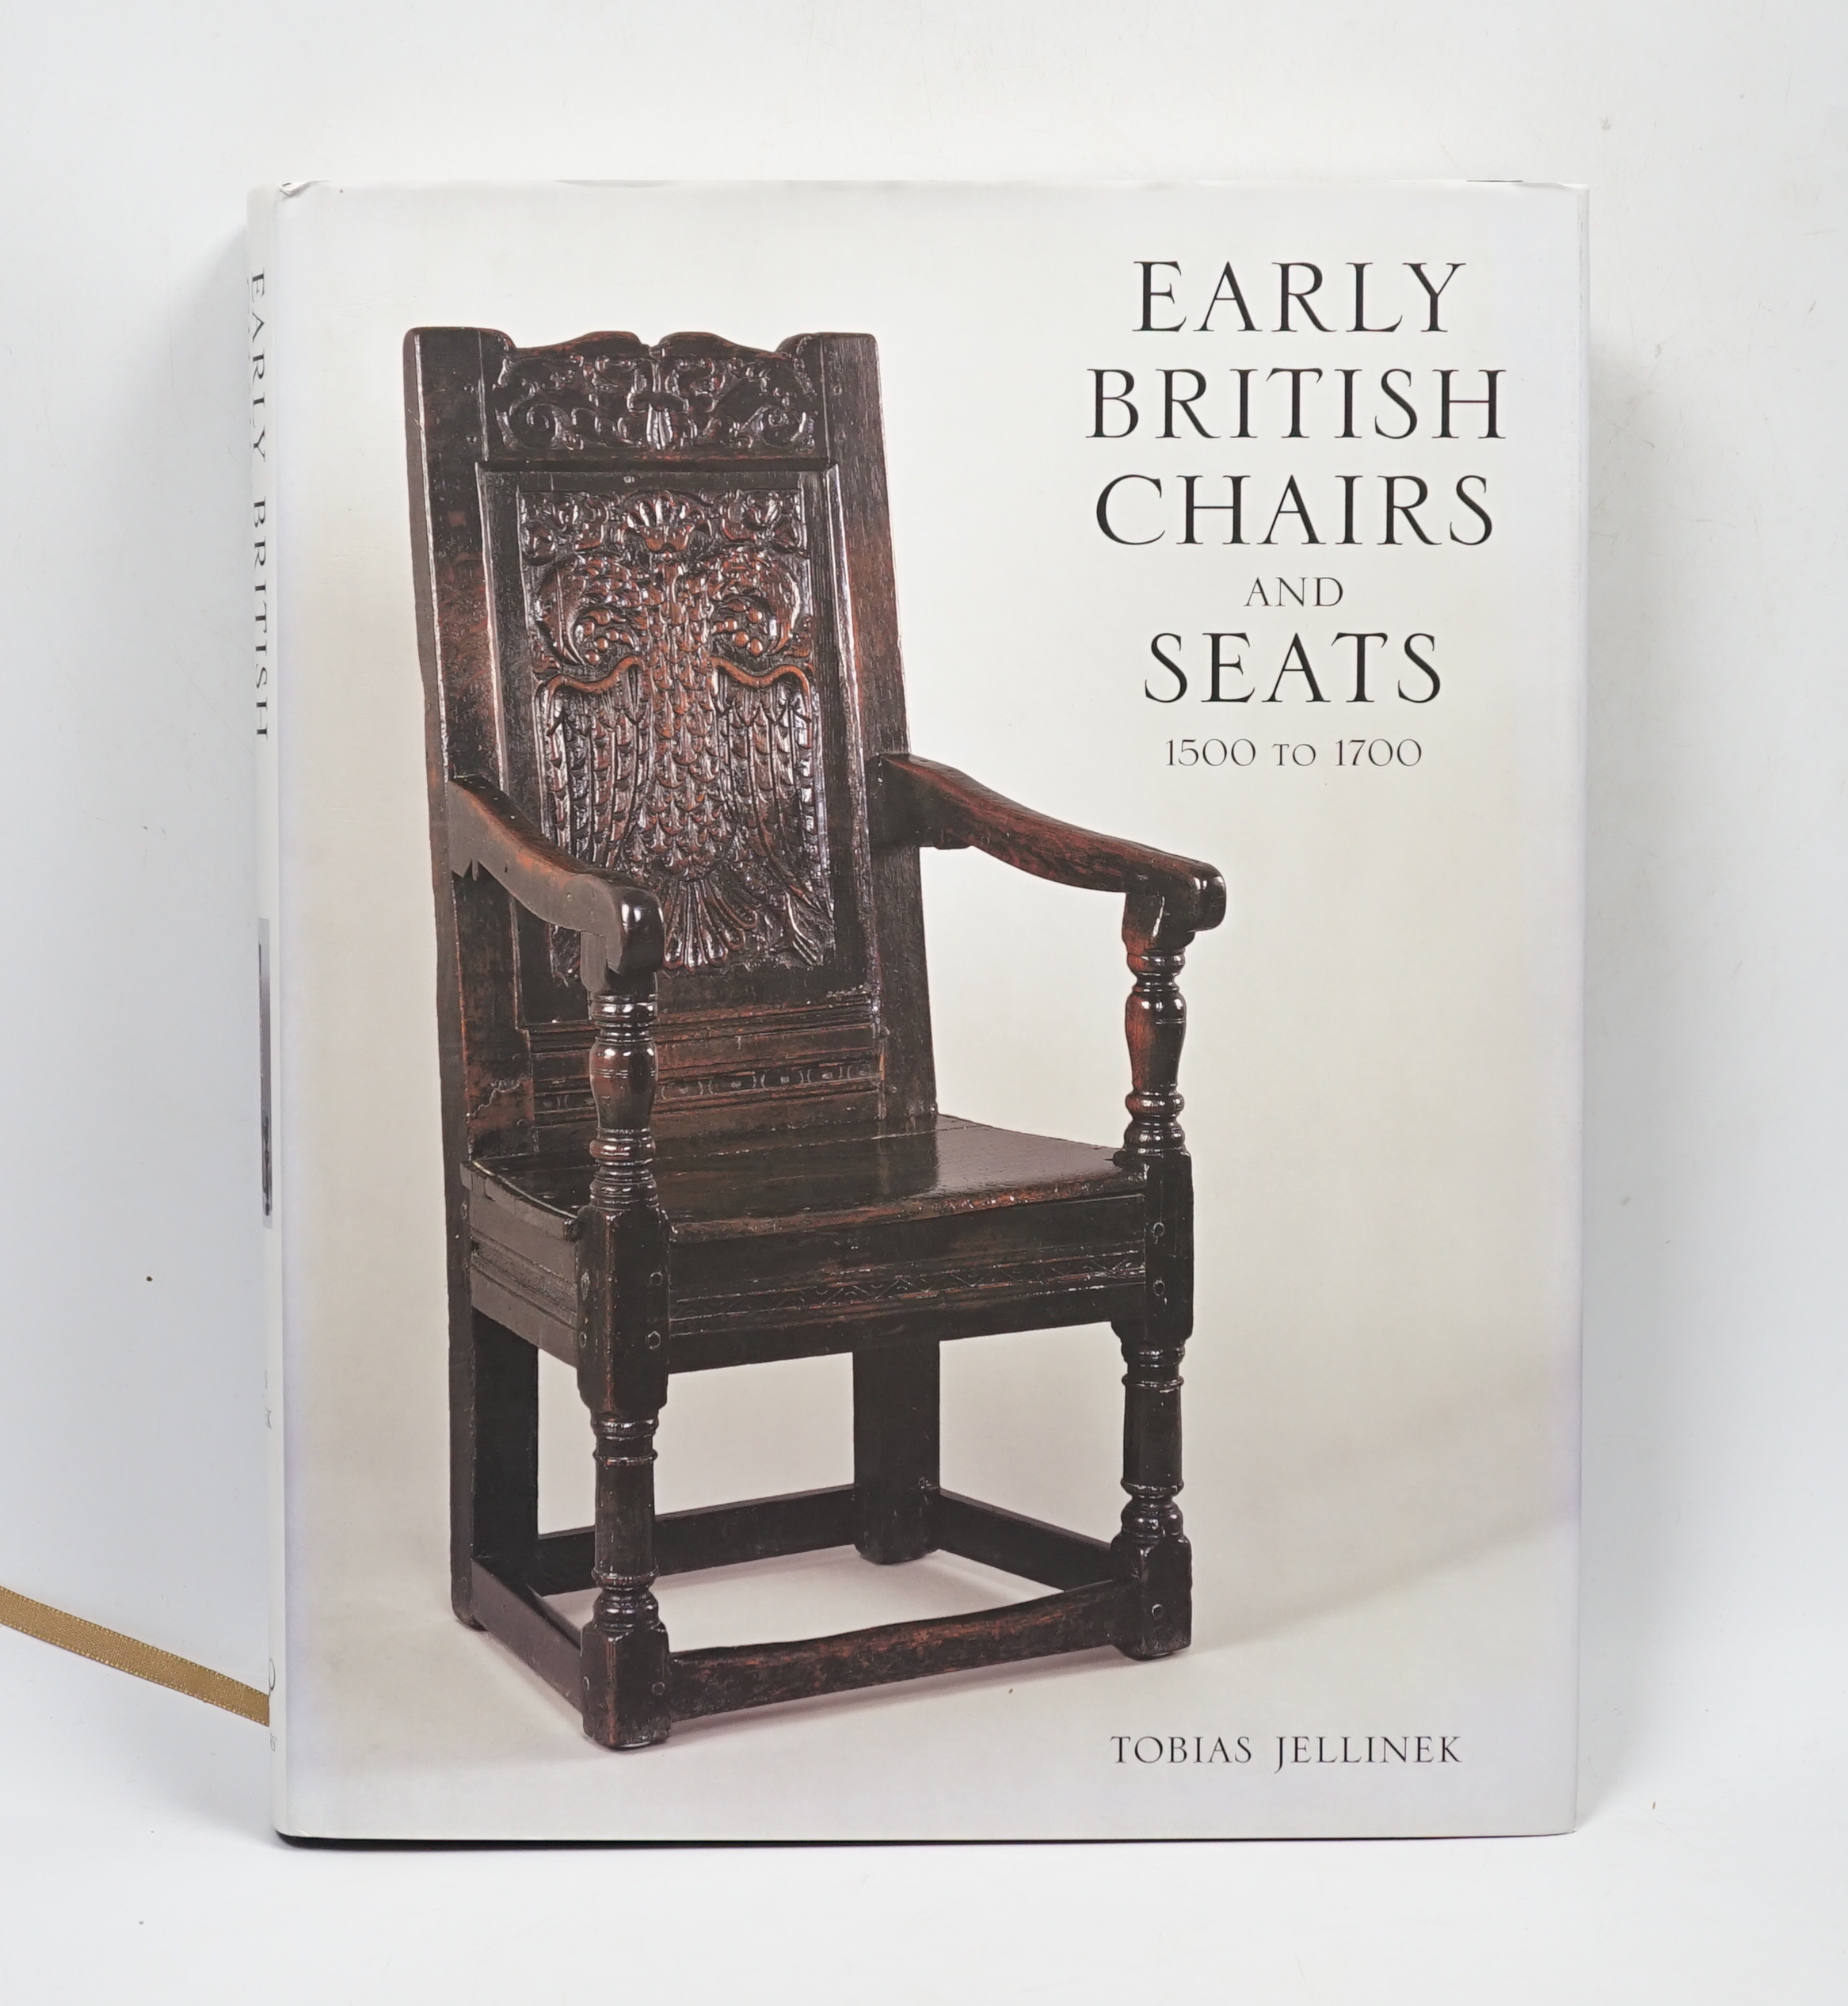 Jellinek, Tobias - Early British Chairs and Seats, Antique Collectors’ Club, 2009